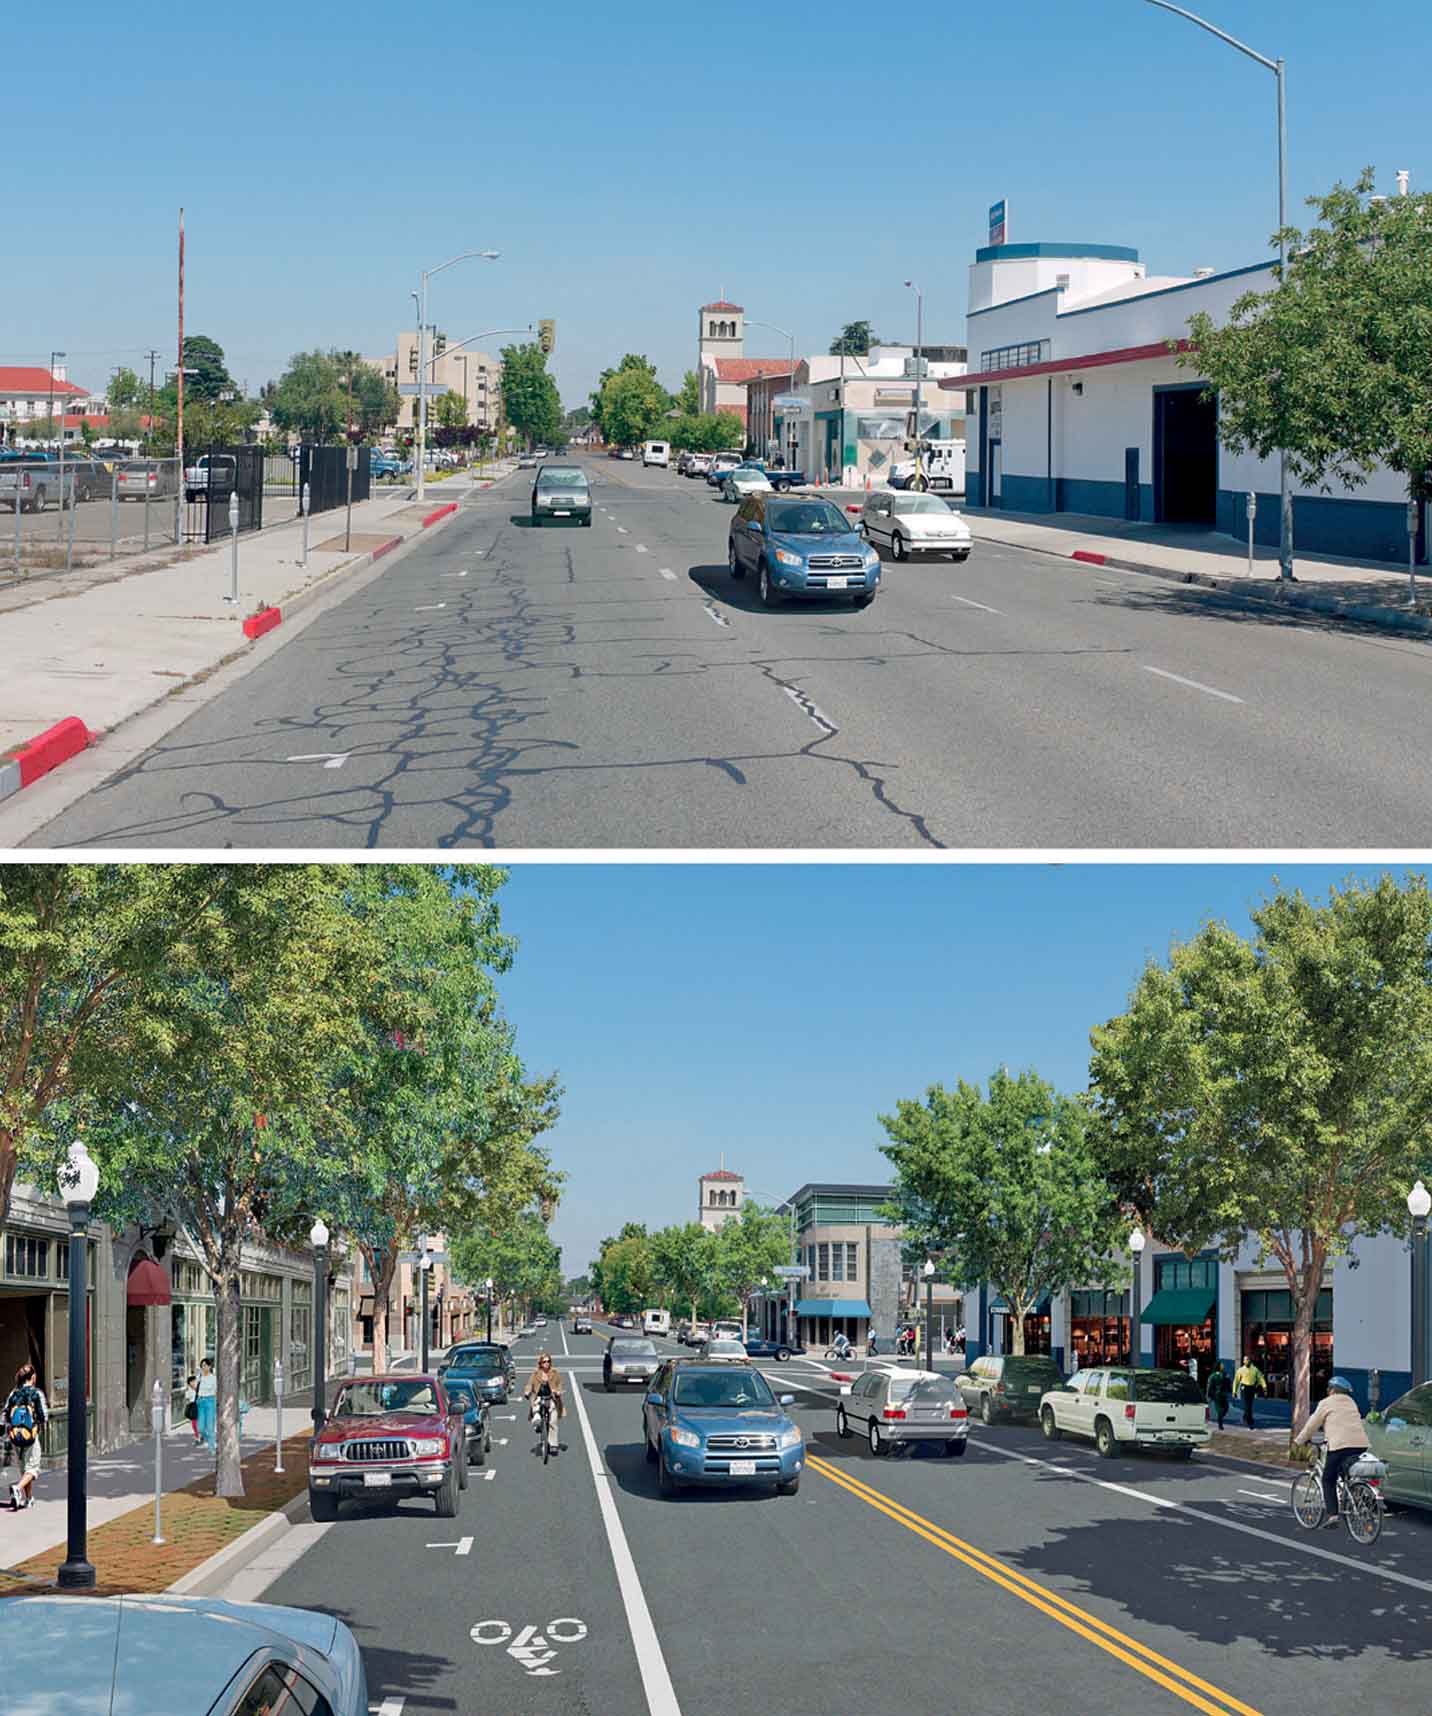 creating-memorable-streets-introduction-trees-parking-buildings-face-accessed-from-sidewalk-transform-underperforming-car-oriented-commercial-corridor-fresno-california-into-vibrant-mixed-use-place-where-people-want-shop-visit